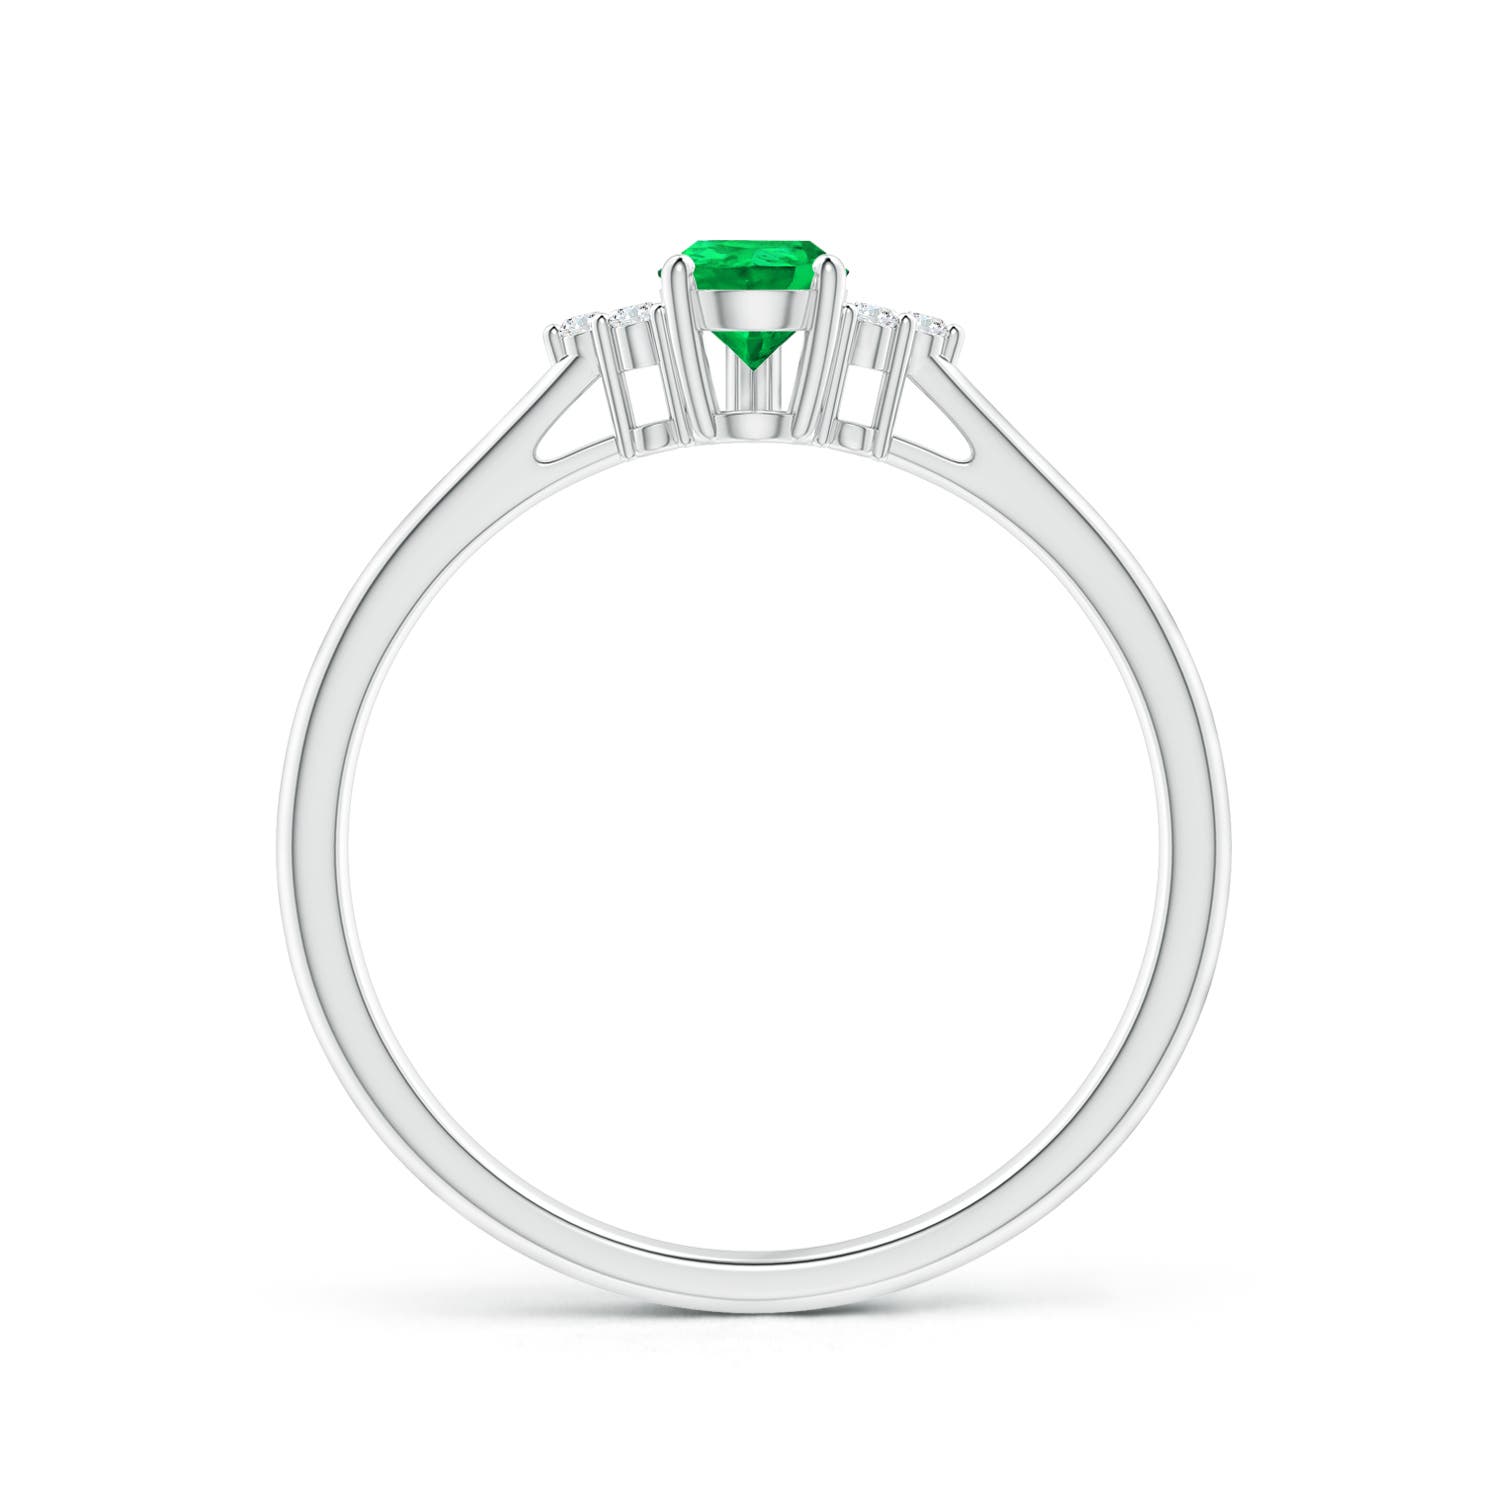 AAA - Emerald / 0.4 CT / 14 KT White Gold